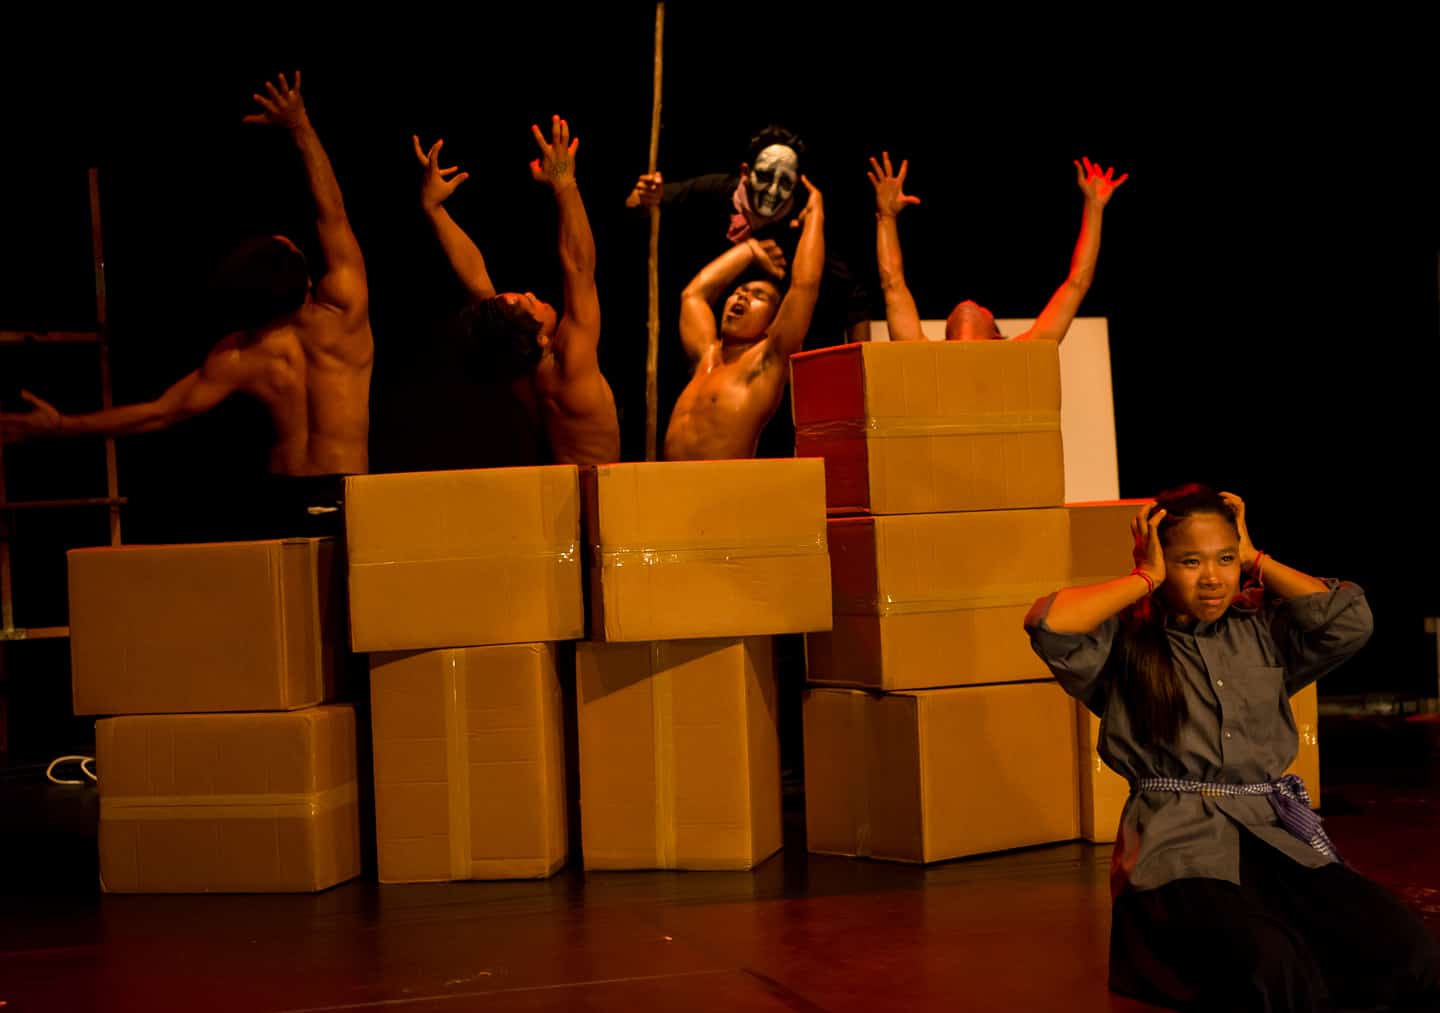 "Sokha" artists performing Khmer Rouge scene symbolically with boxes